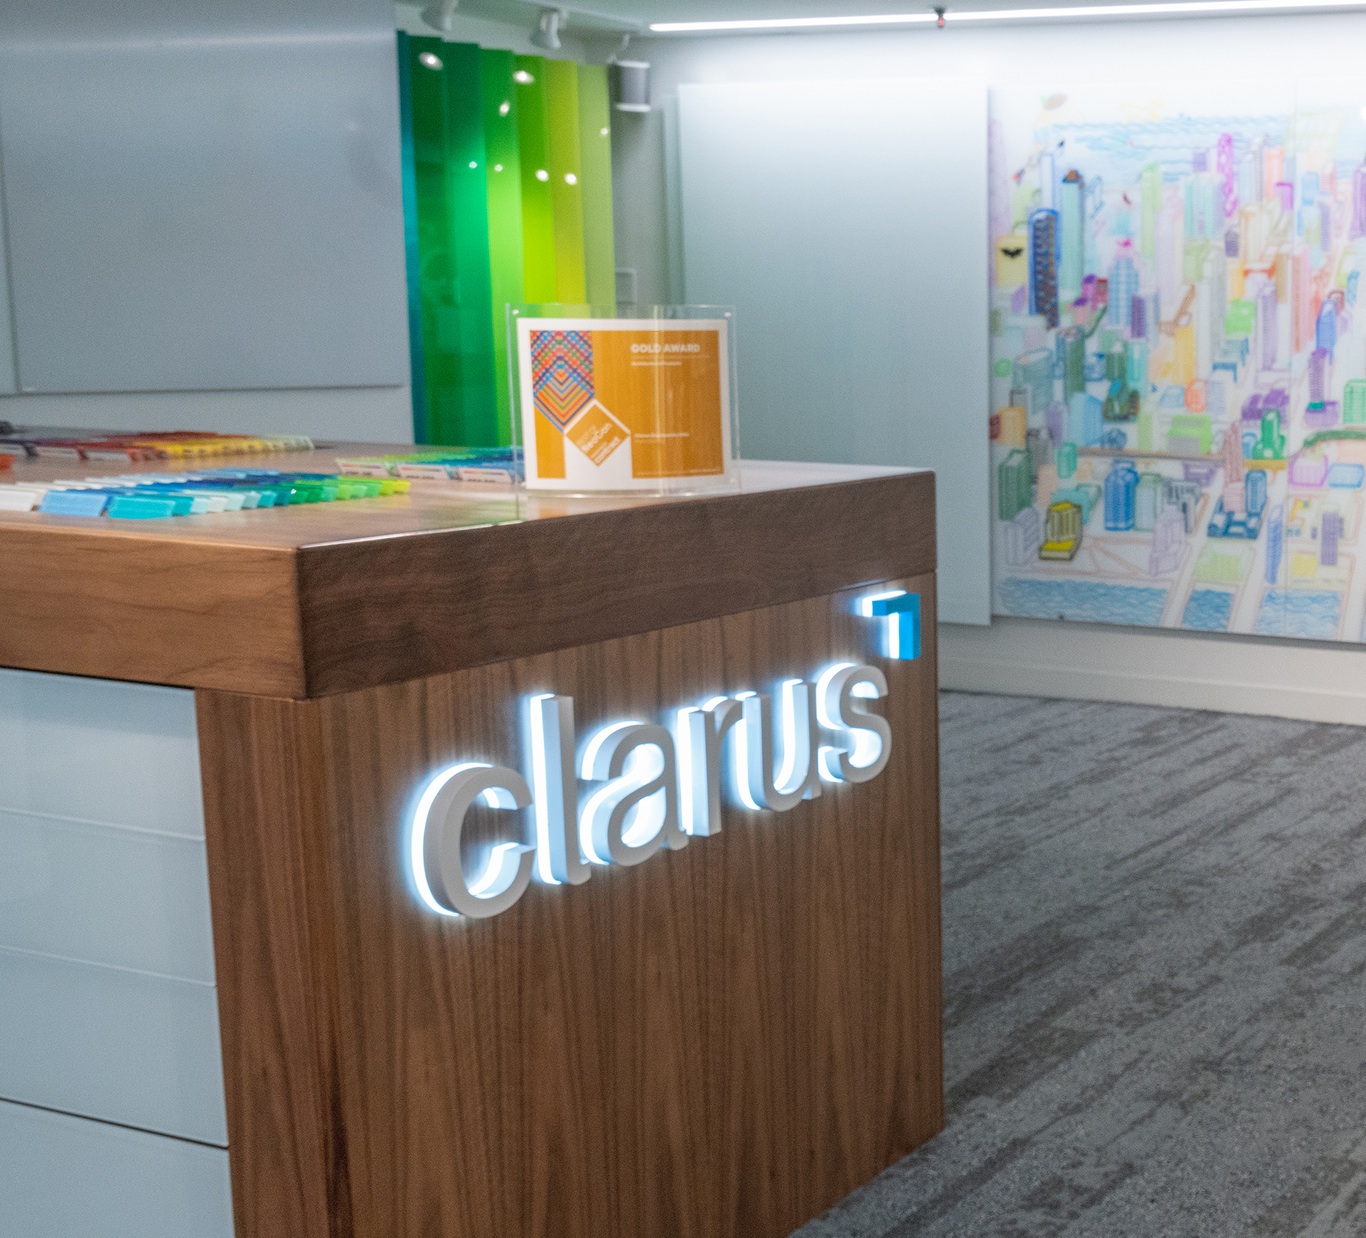 At NeoCon 2018: Glide by Clarus Slides to Gold